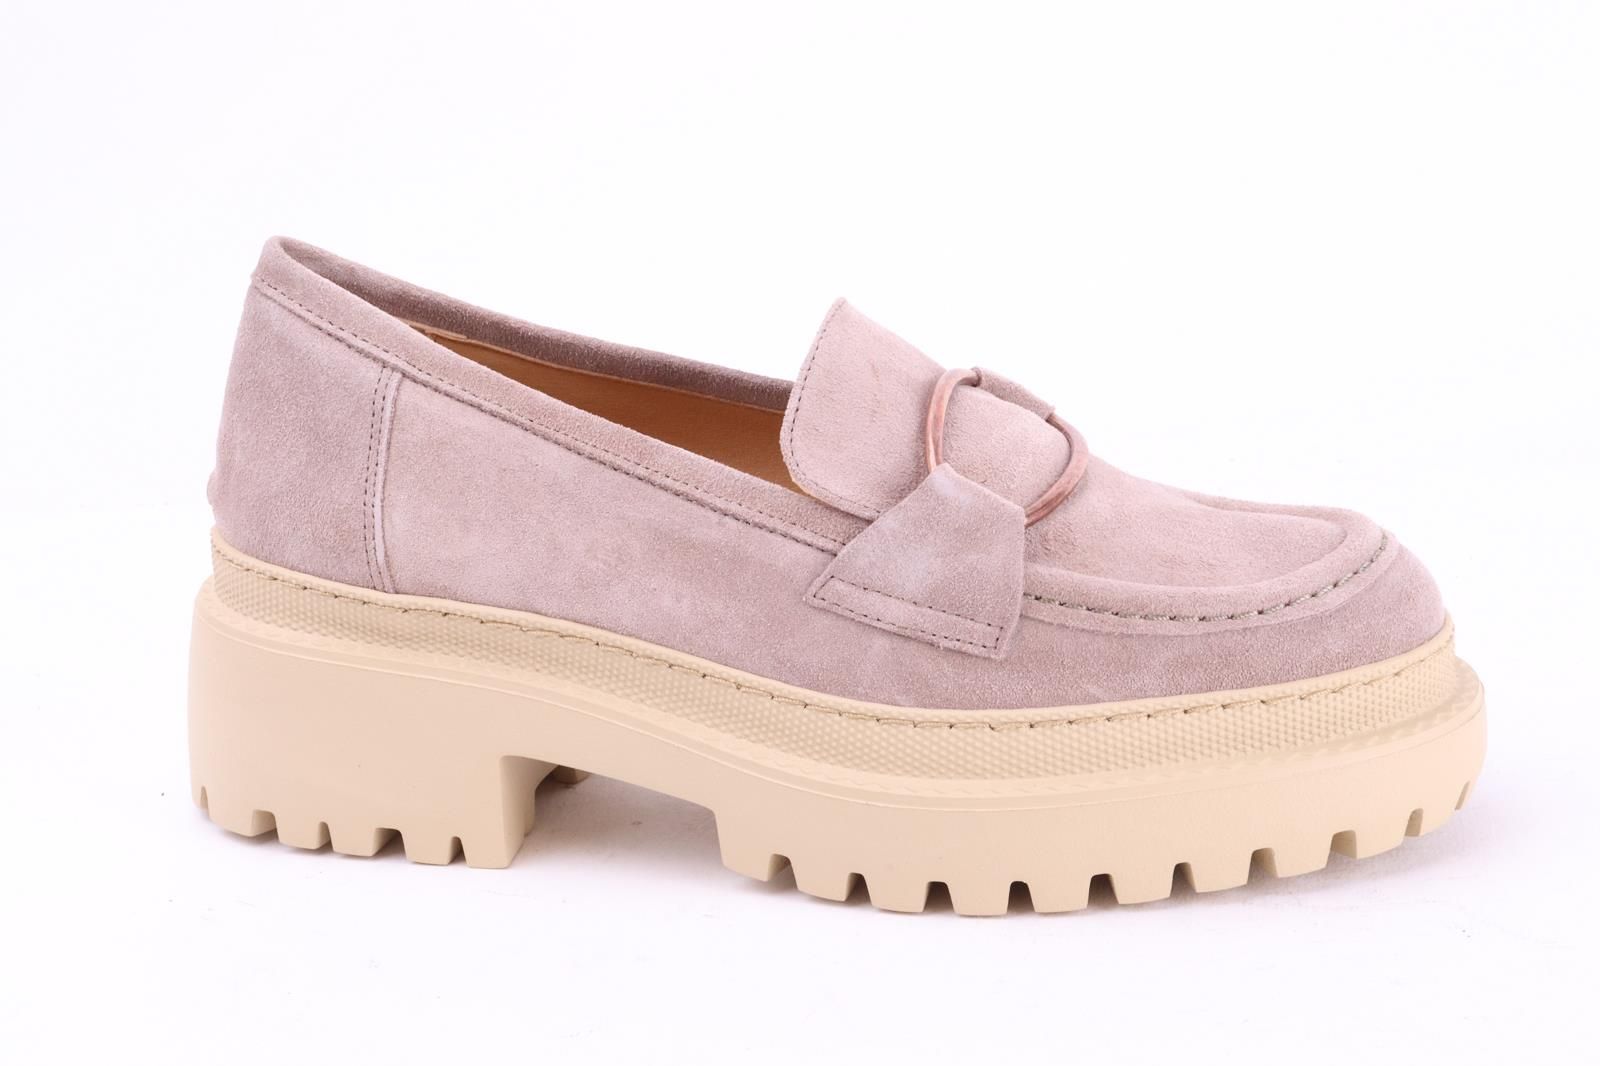 Frida dames mocassin / loafer in taupe suede leer op micro zool.